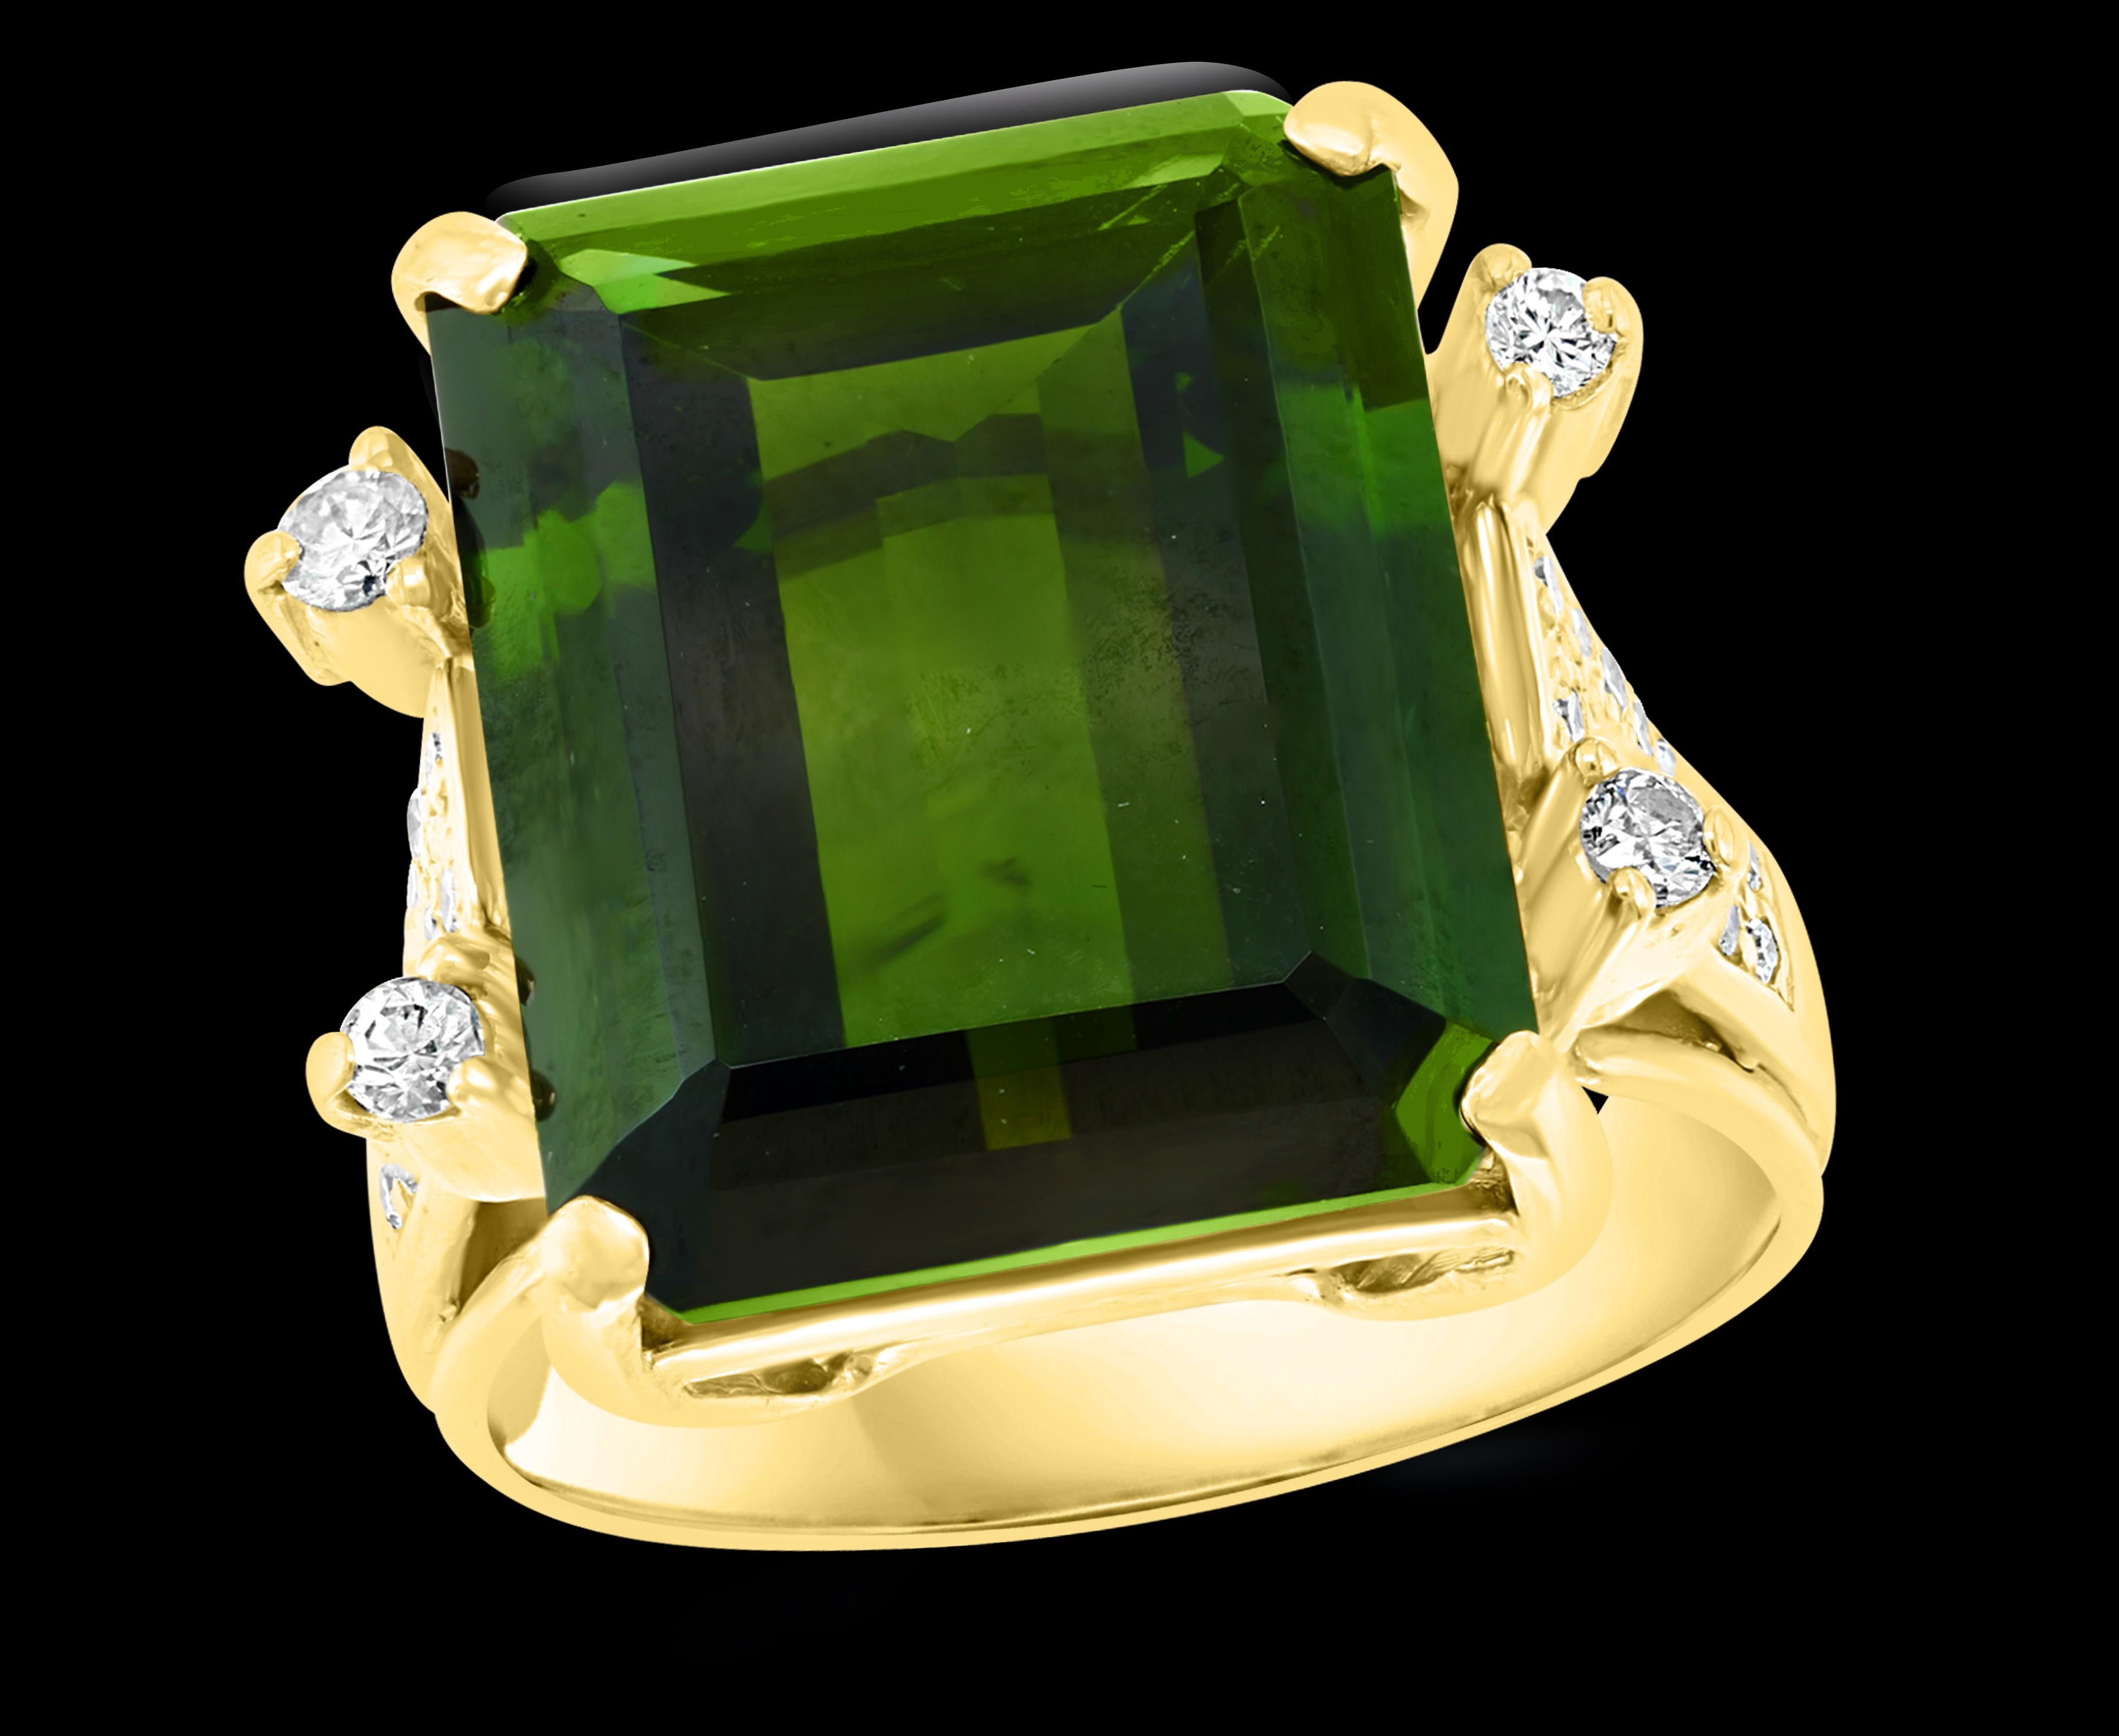 Approximately 12 + Carat Green Tourmaline and 0.50 Ct Diamond Cocktail Ring 18 K Yellow Gold 
A classic, Cocktail ring 
Measurements  of the stone is 15X 13 which is over 12 ct
Huge 12+ Carat of very clean Nice  Green Tourmaline full of luster and